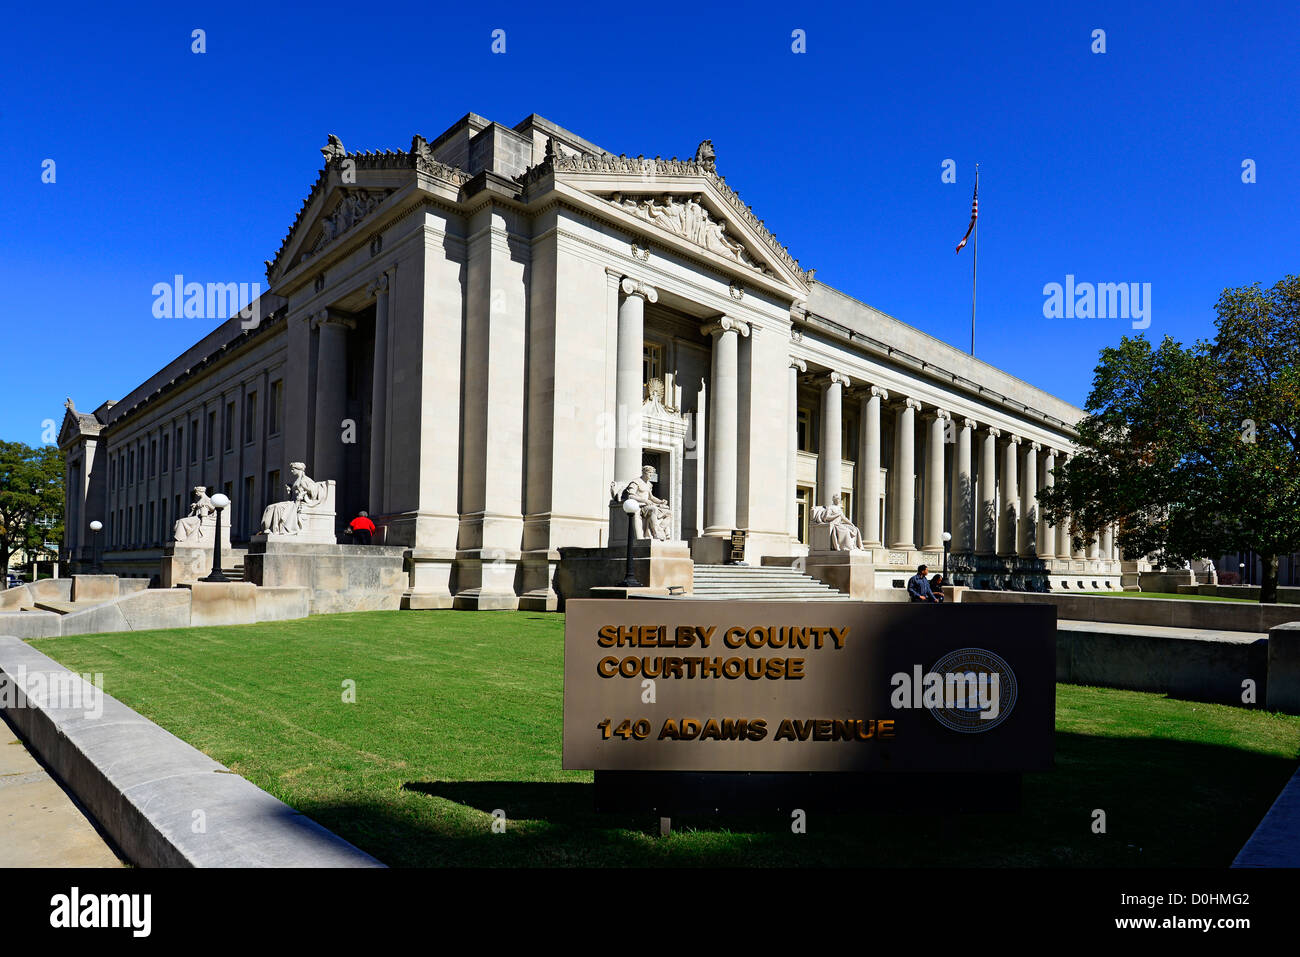 Shelby County Courthouse Memphis Tennessee TN Stock Photo